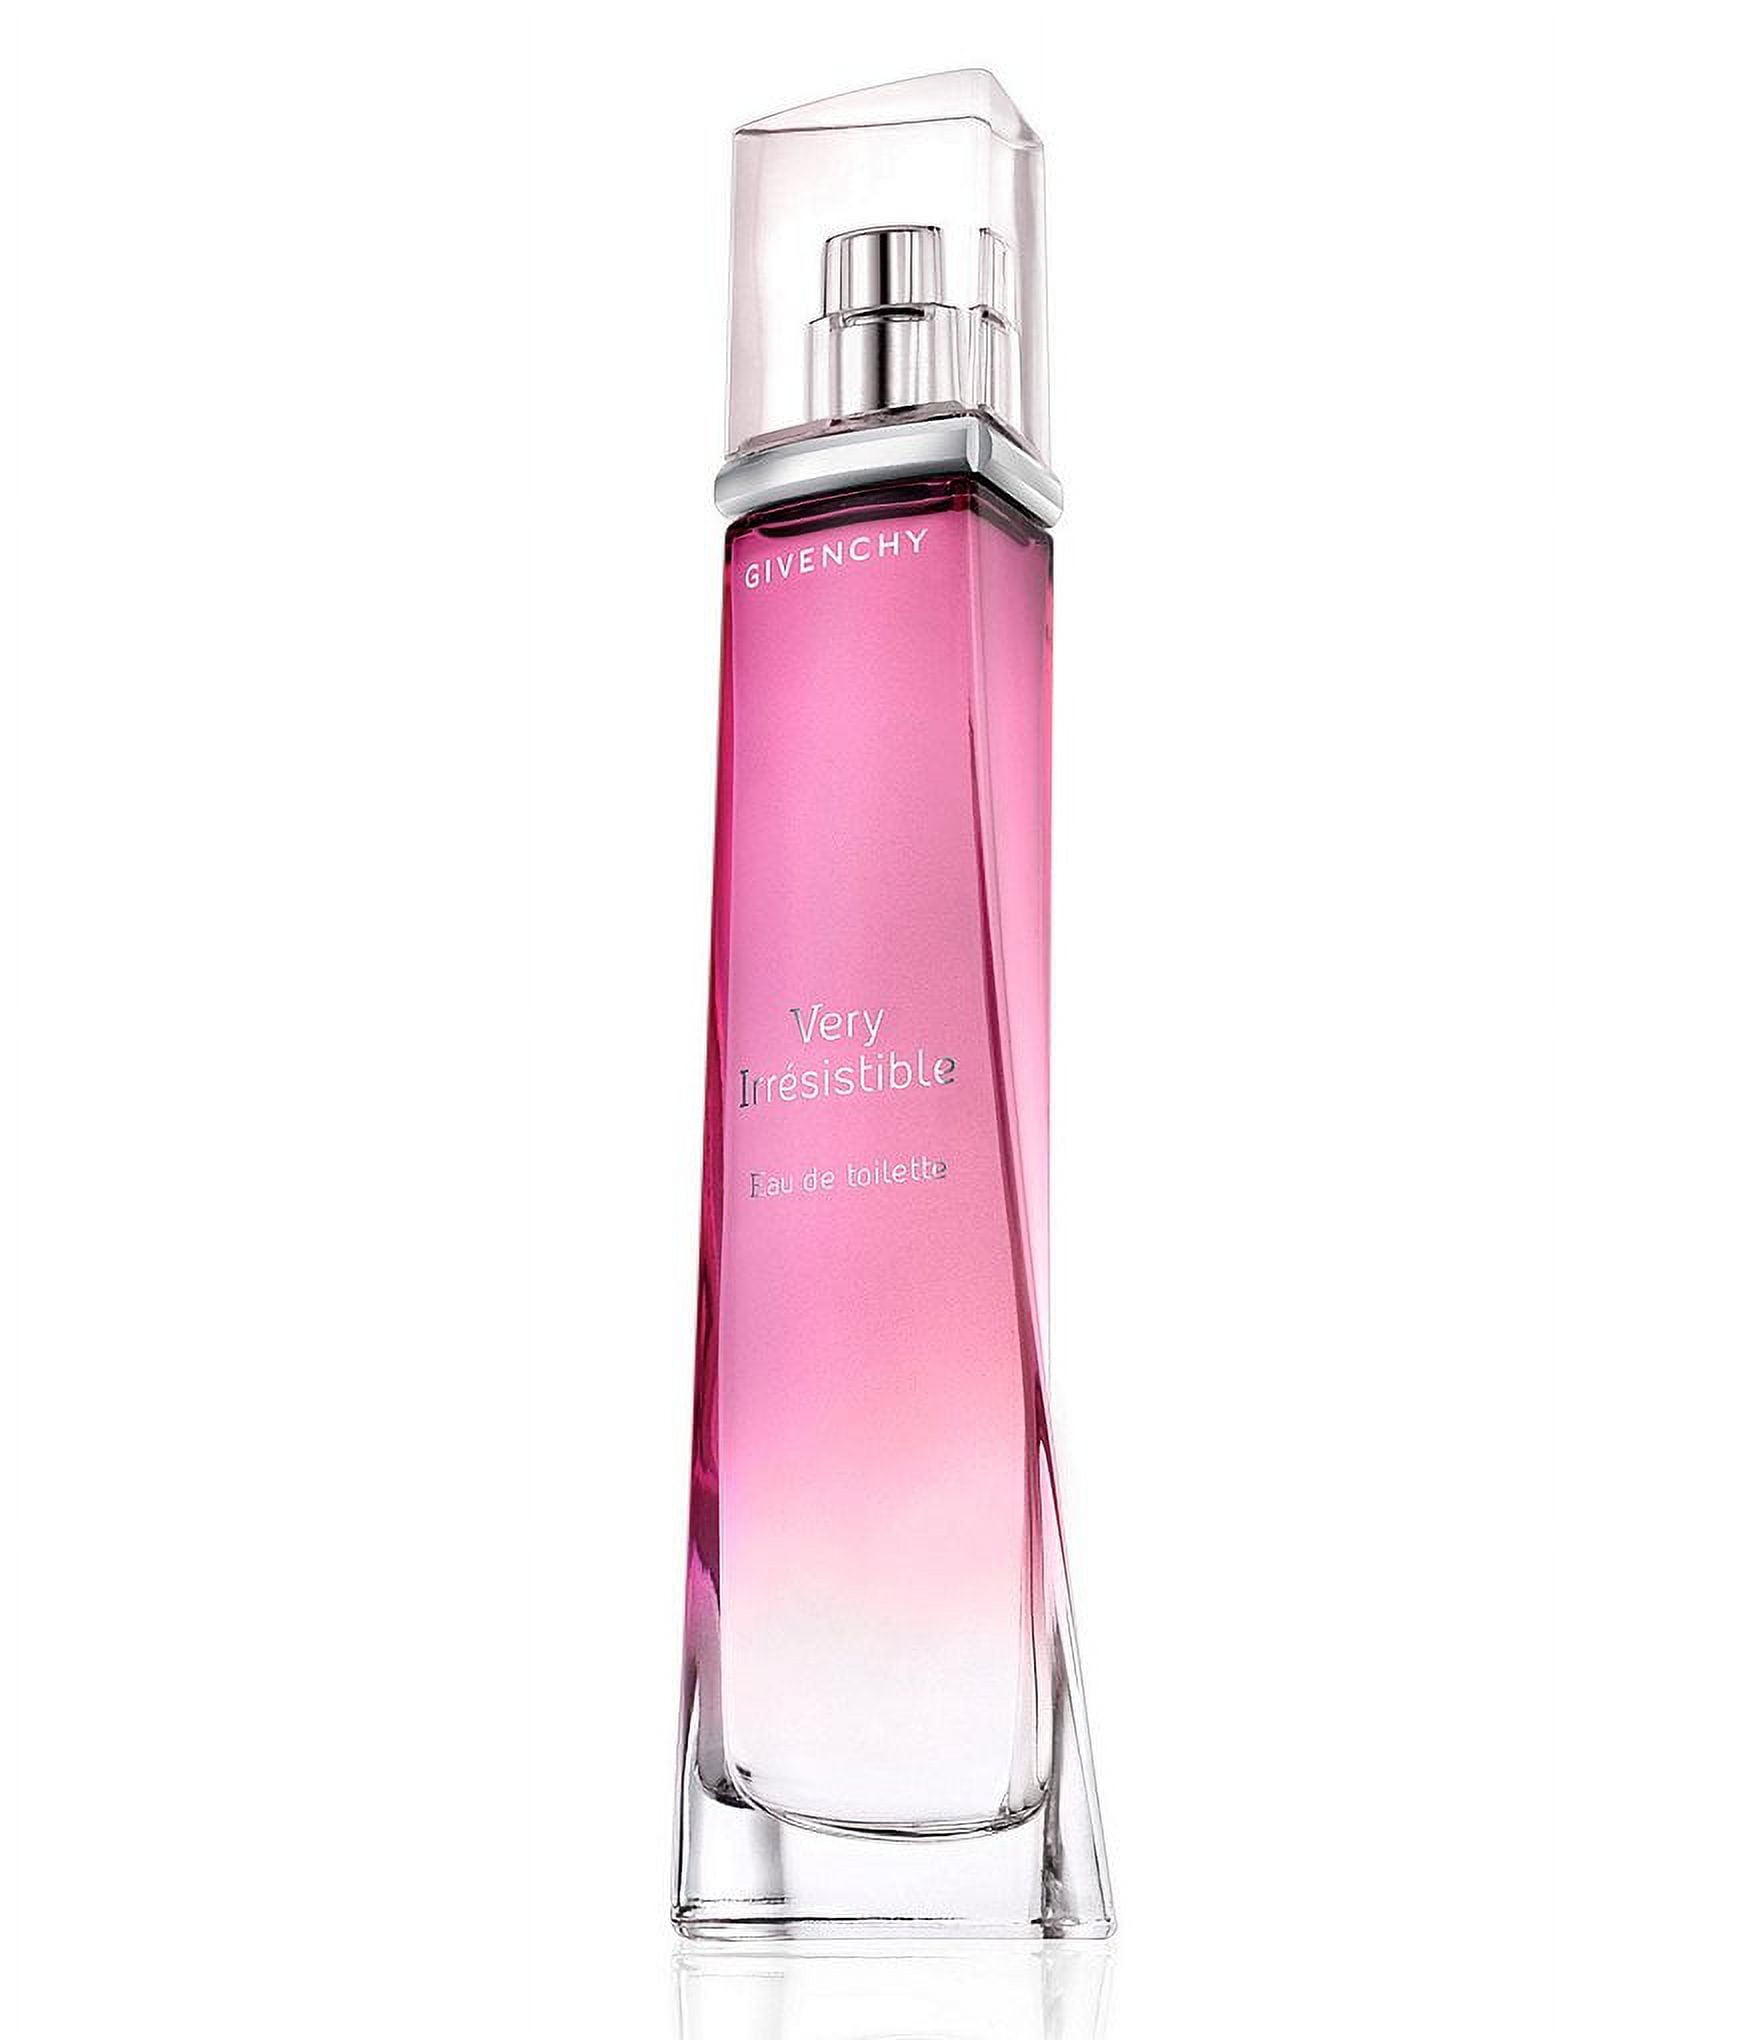 Buy Givenchy Very Irresistible Eau de Toilette from £45.25 (Today) – Best  Deals on